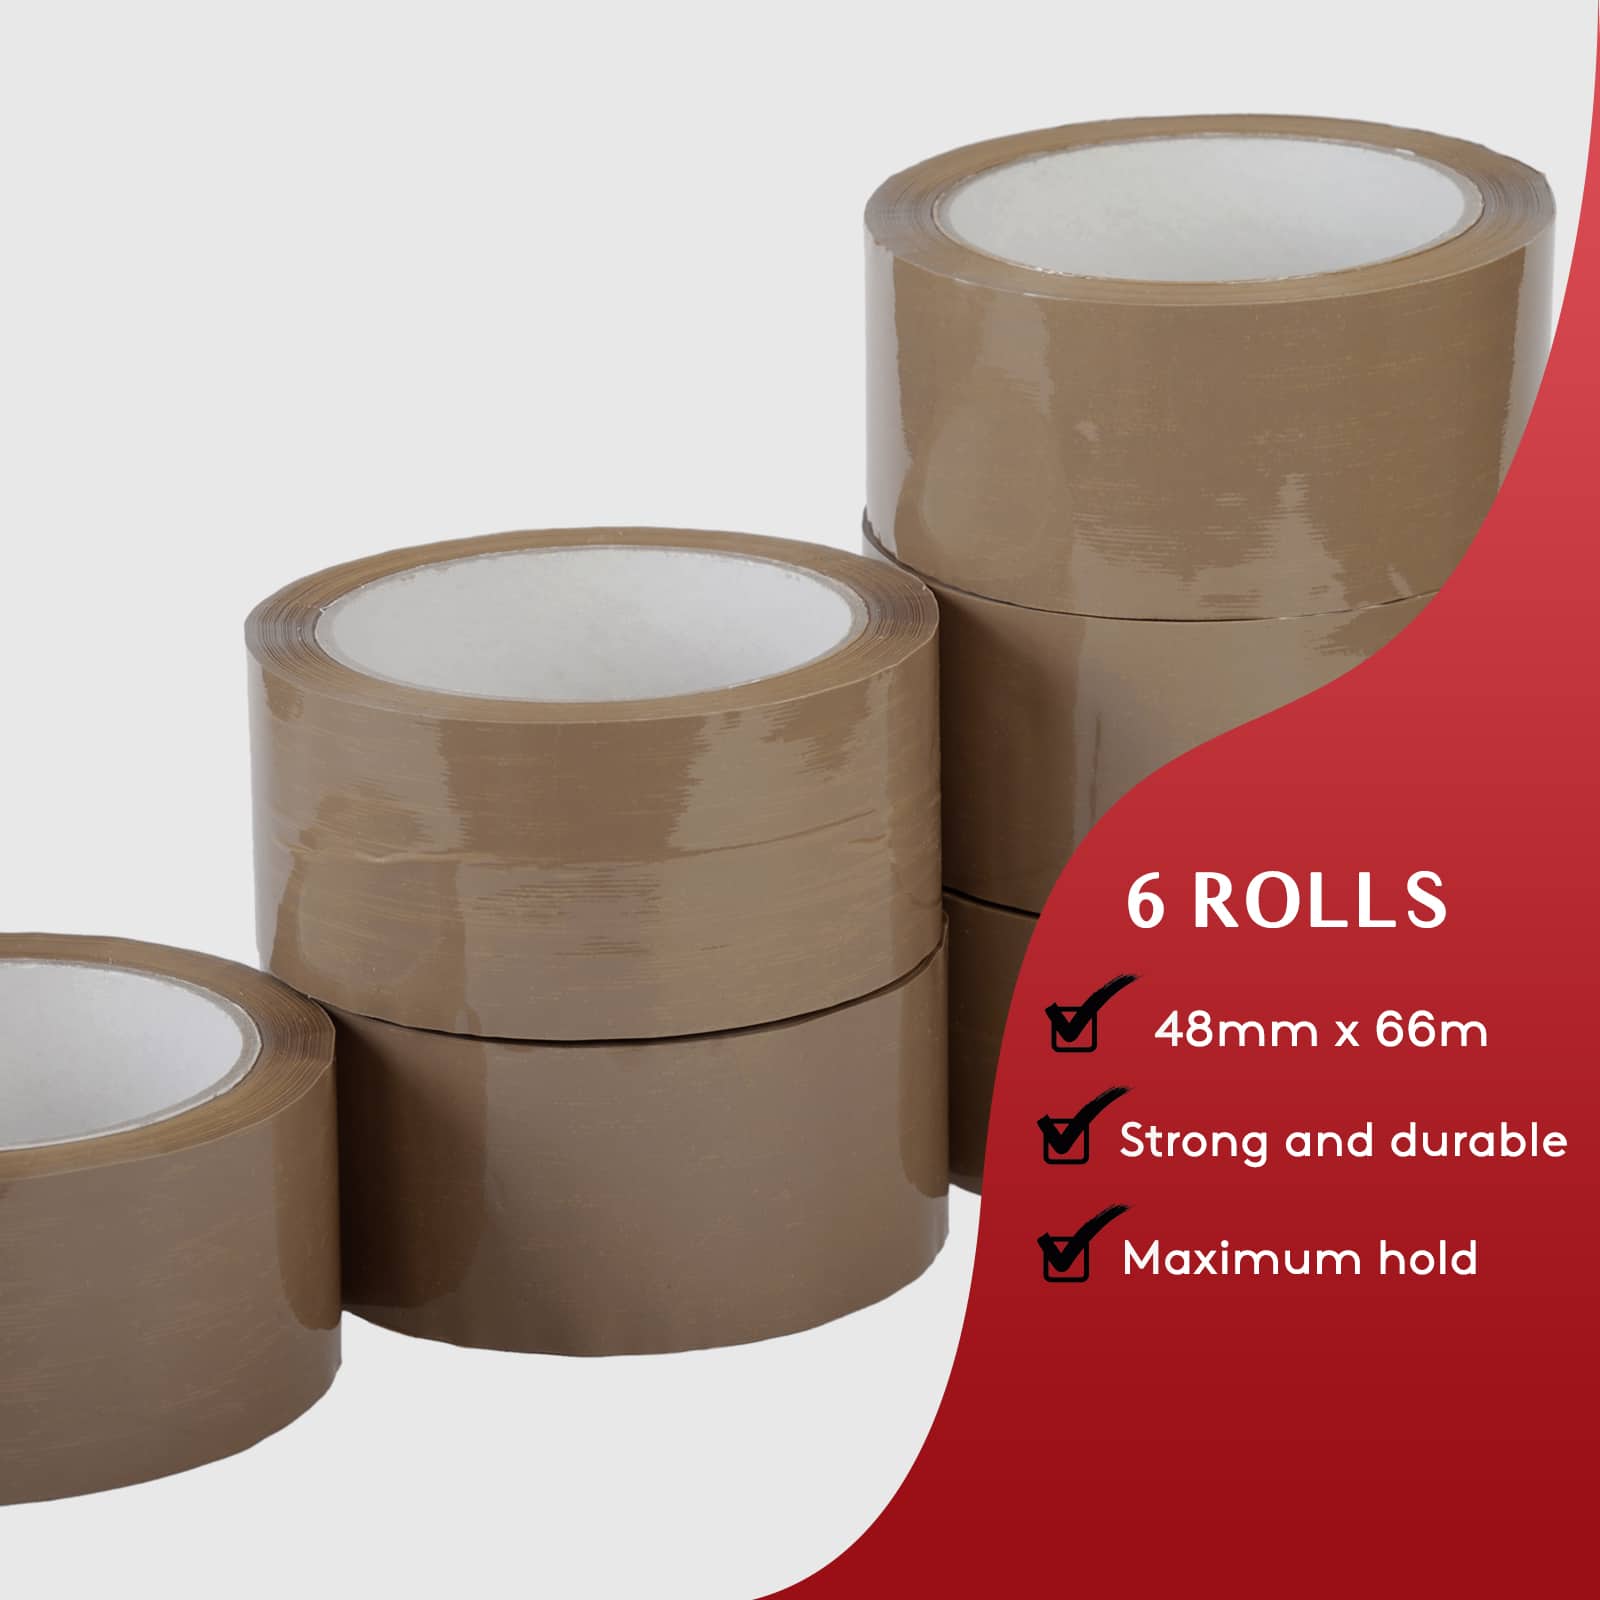 48mm x 66m - Big Rolls Parcel Tape 2" 6 ROLLS OF STRONG BROWN PACKING TAPE 